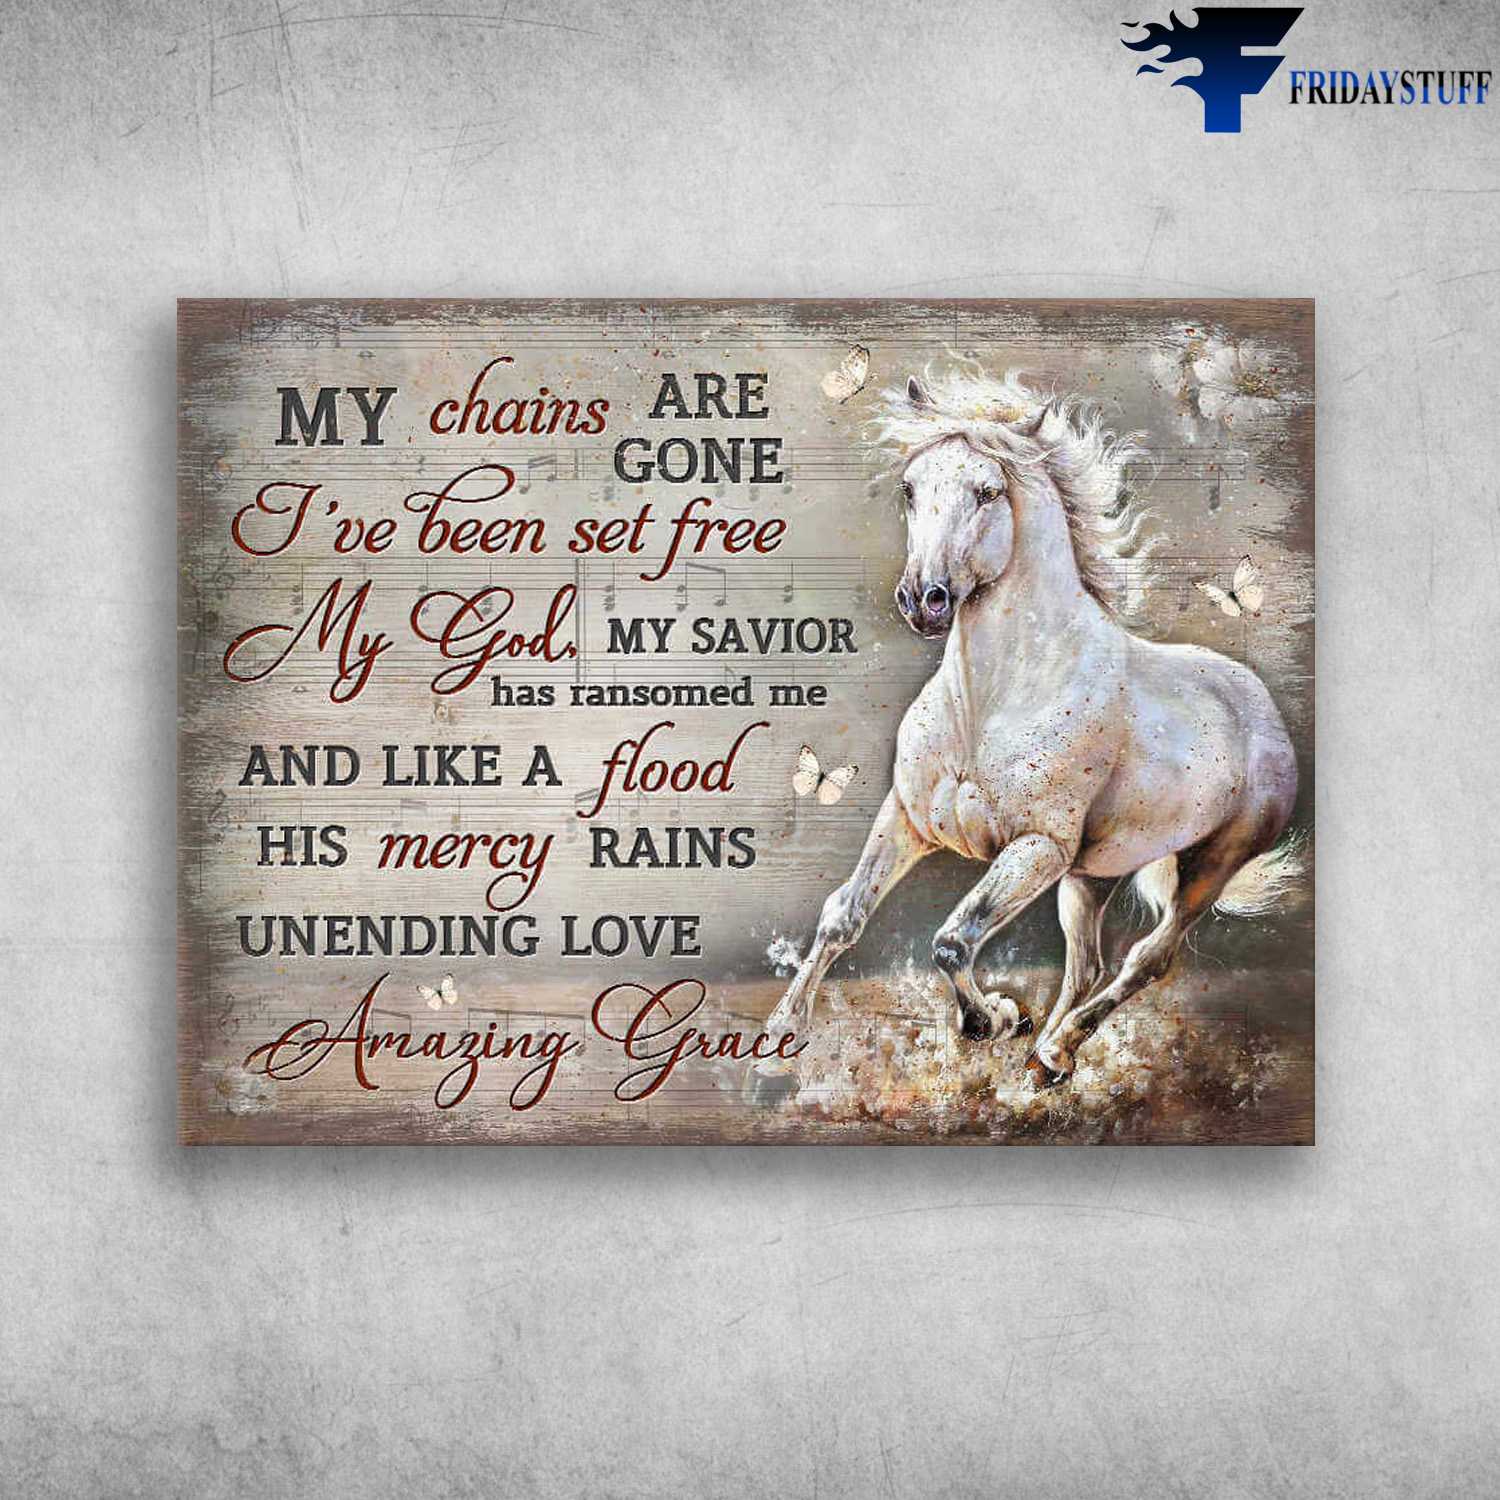 White Horse, Butterfly Music Sheet - My Chains Are Gone, I've Been Set Free, My God, My Savior Has Ransomed Me, And Like A Flood His Mercy Rains, Undening Love, Amazing Grace